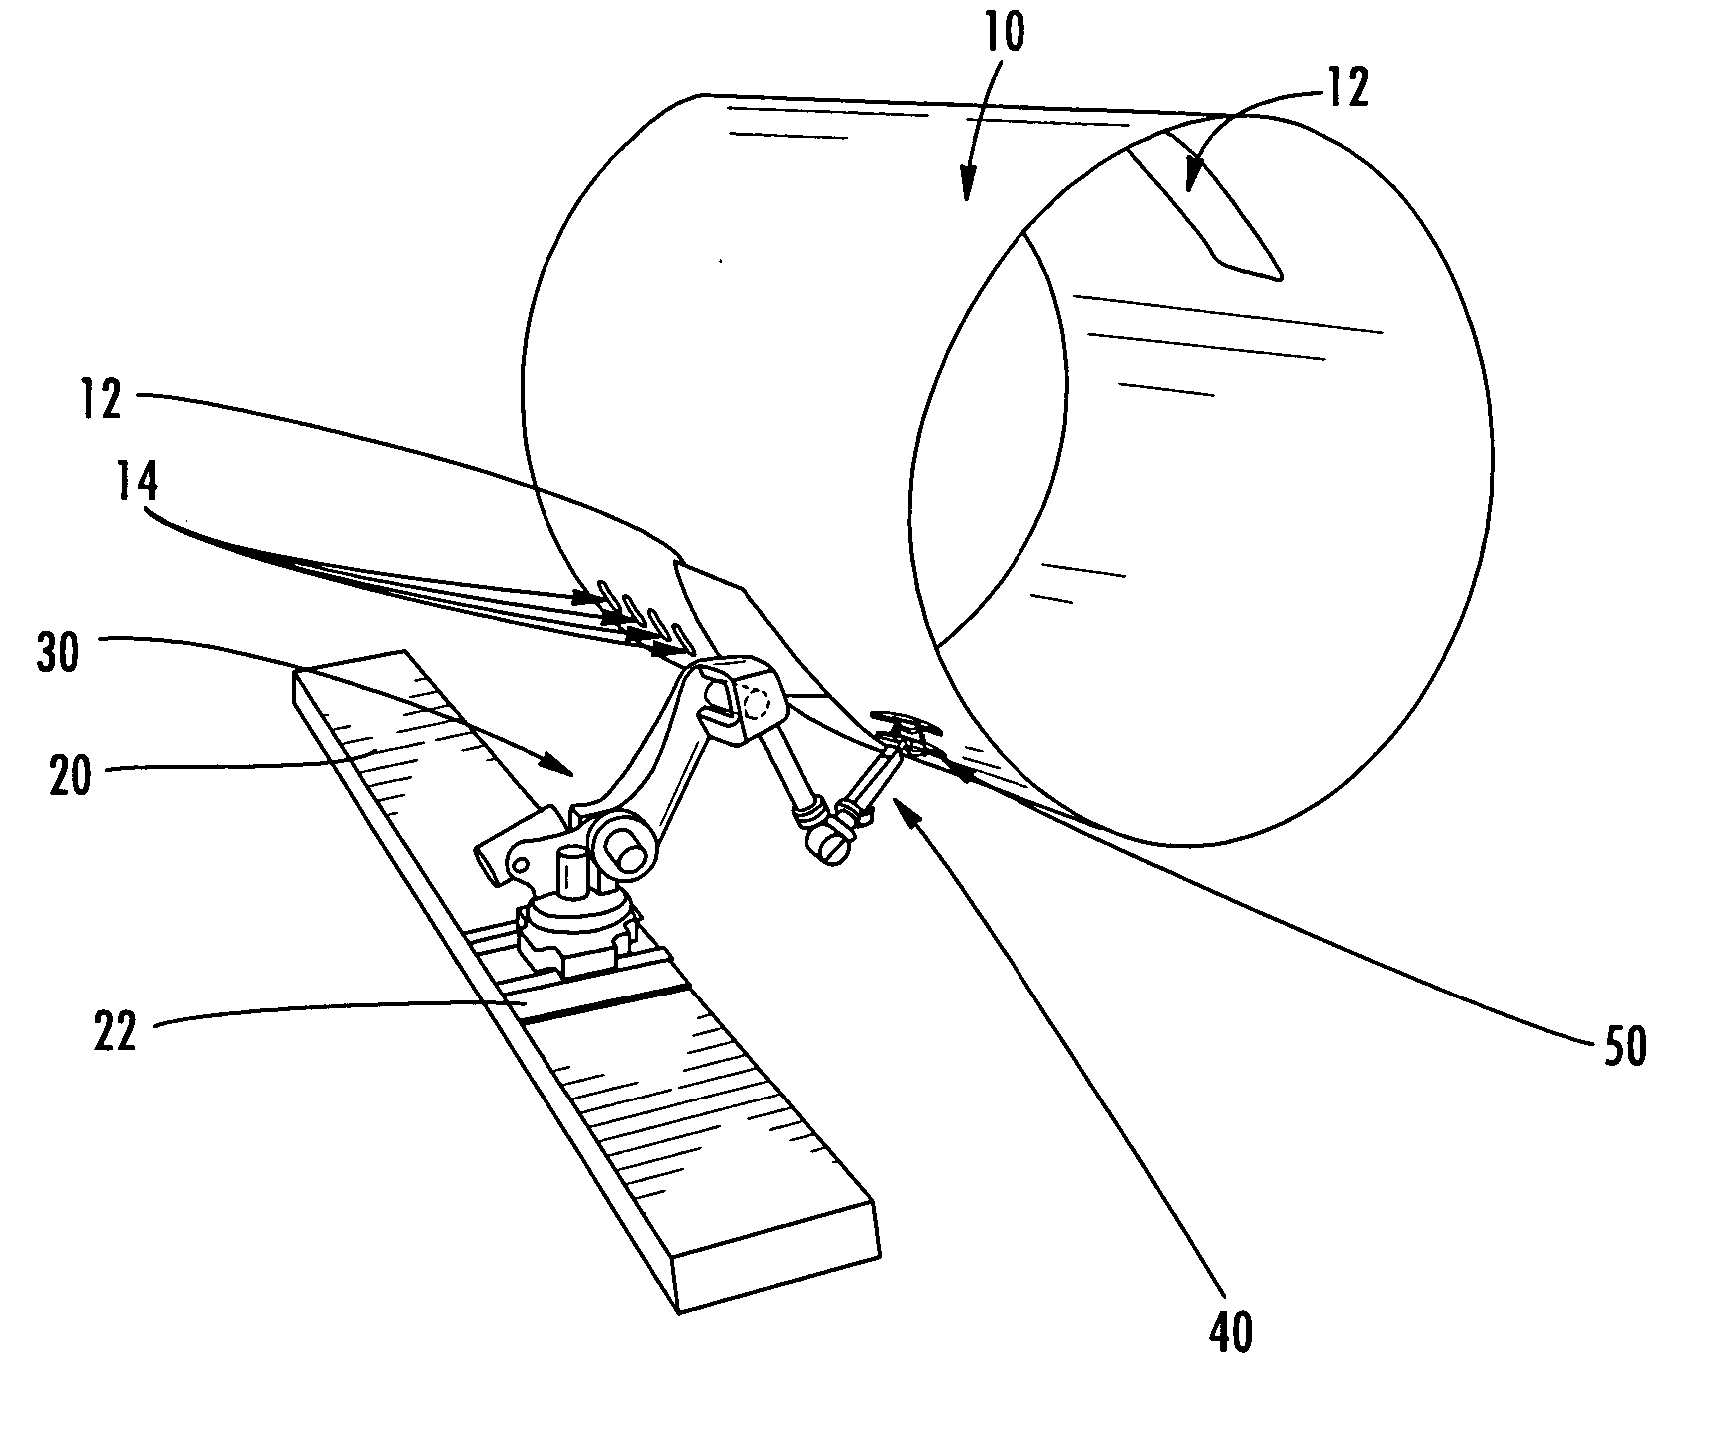 Ultrasonic inspection apparatus, system, and method